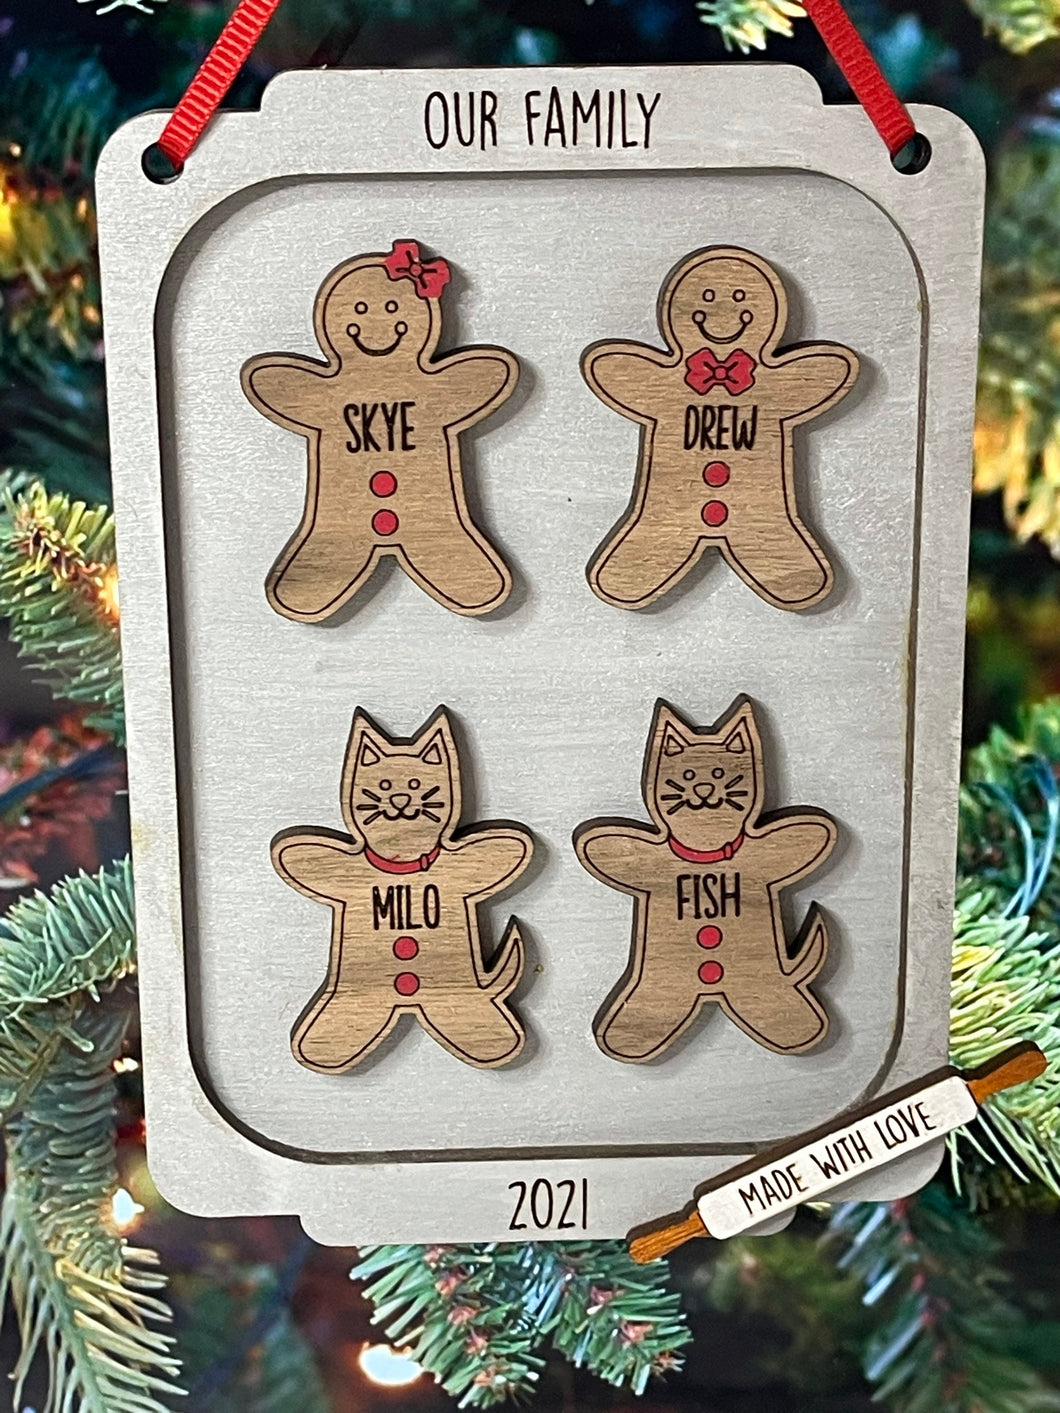 Christmas Gingerbread Cookie Ornament Personalized Inc Cat Dog Cookie Sheet Kitchen Bake Herber Studios